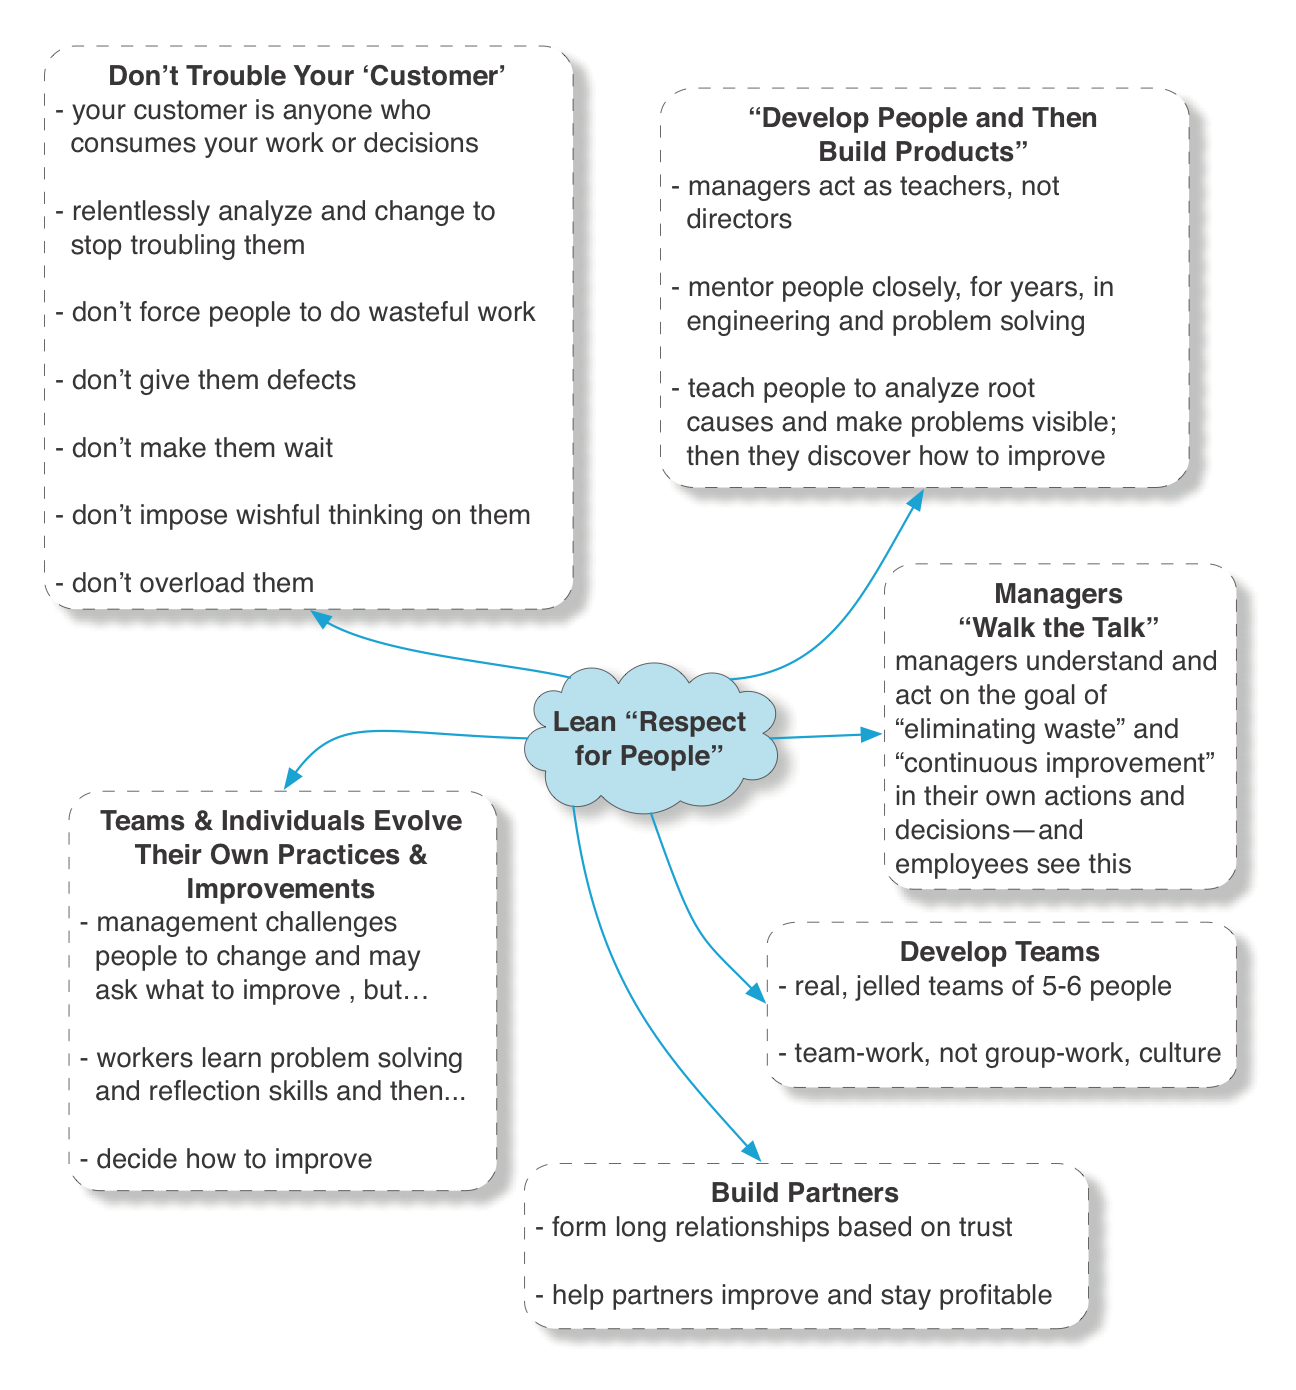 Some implications of respect for people in lean thinking.